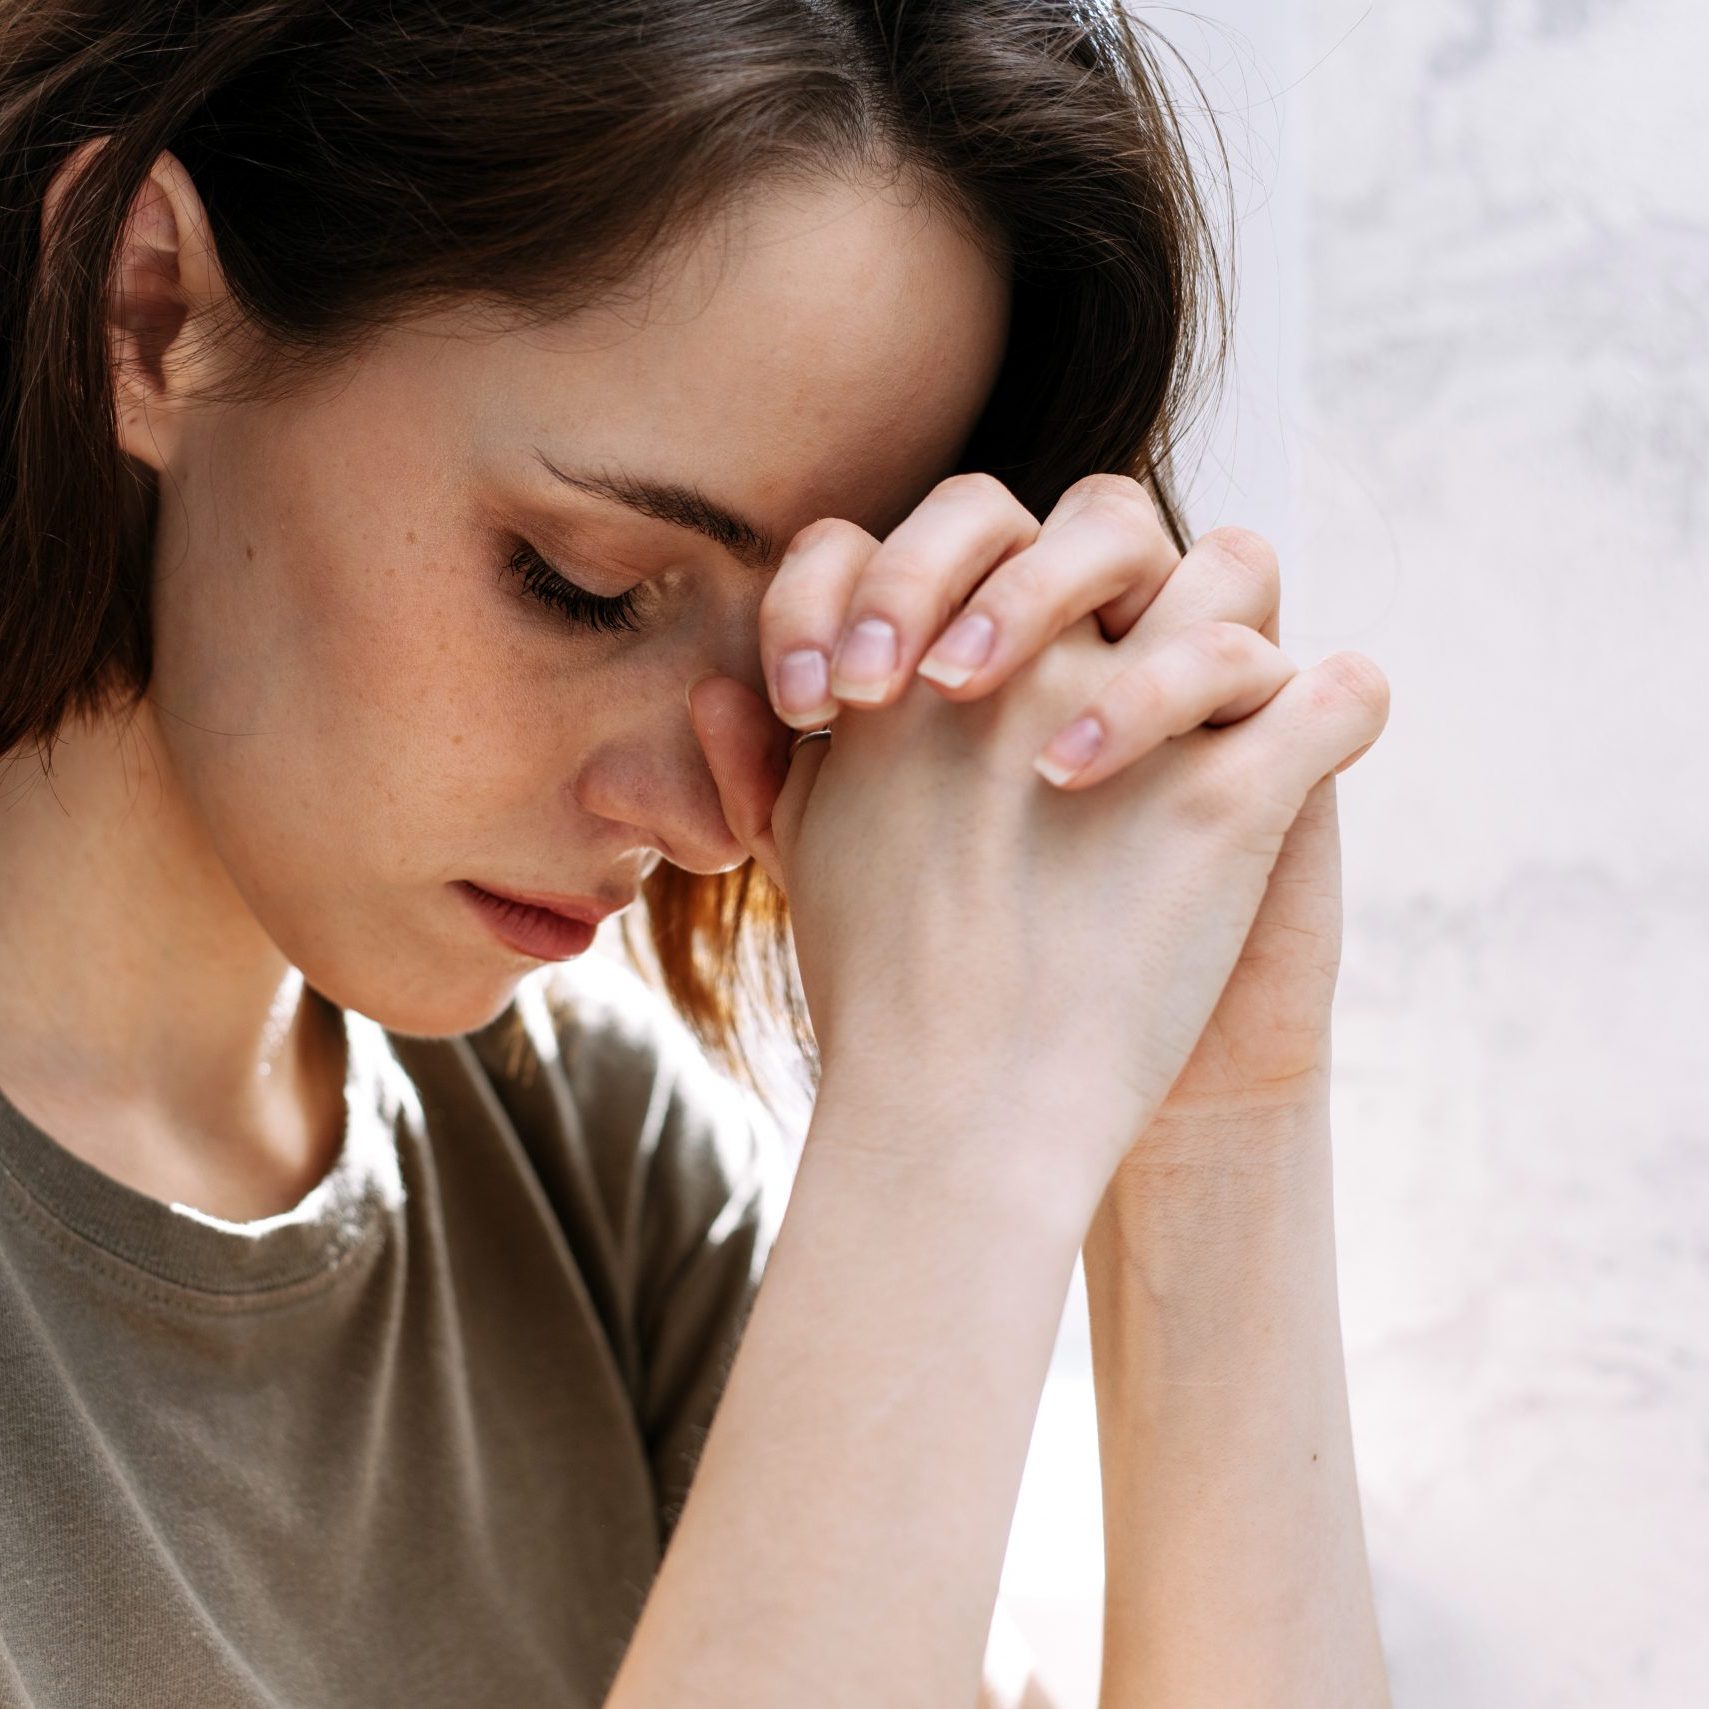 Woman hands praying to god. Woman Pray for god blessing to wishing have a better life. begging for forgiveness and believe in goodness. Christian life crisis prayer to god.